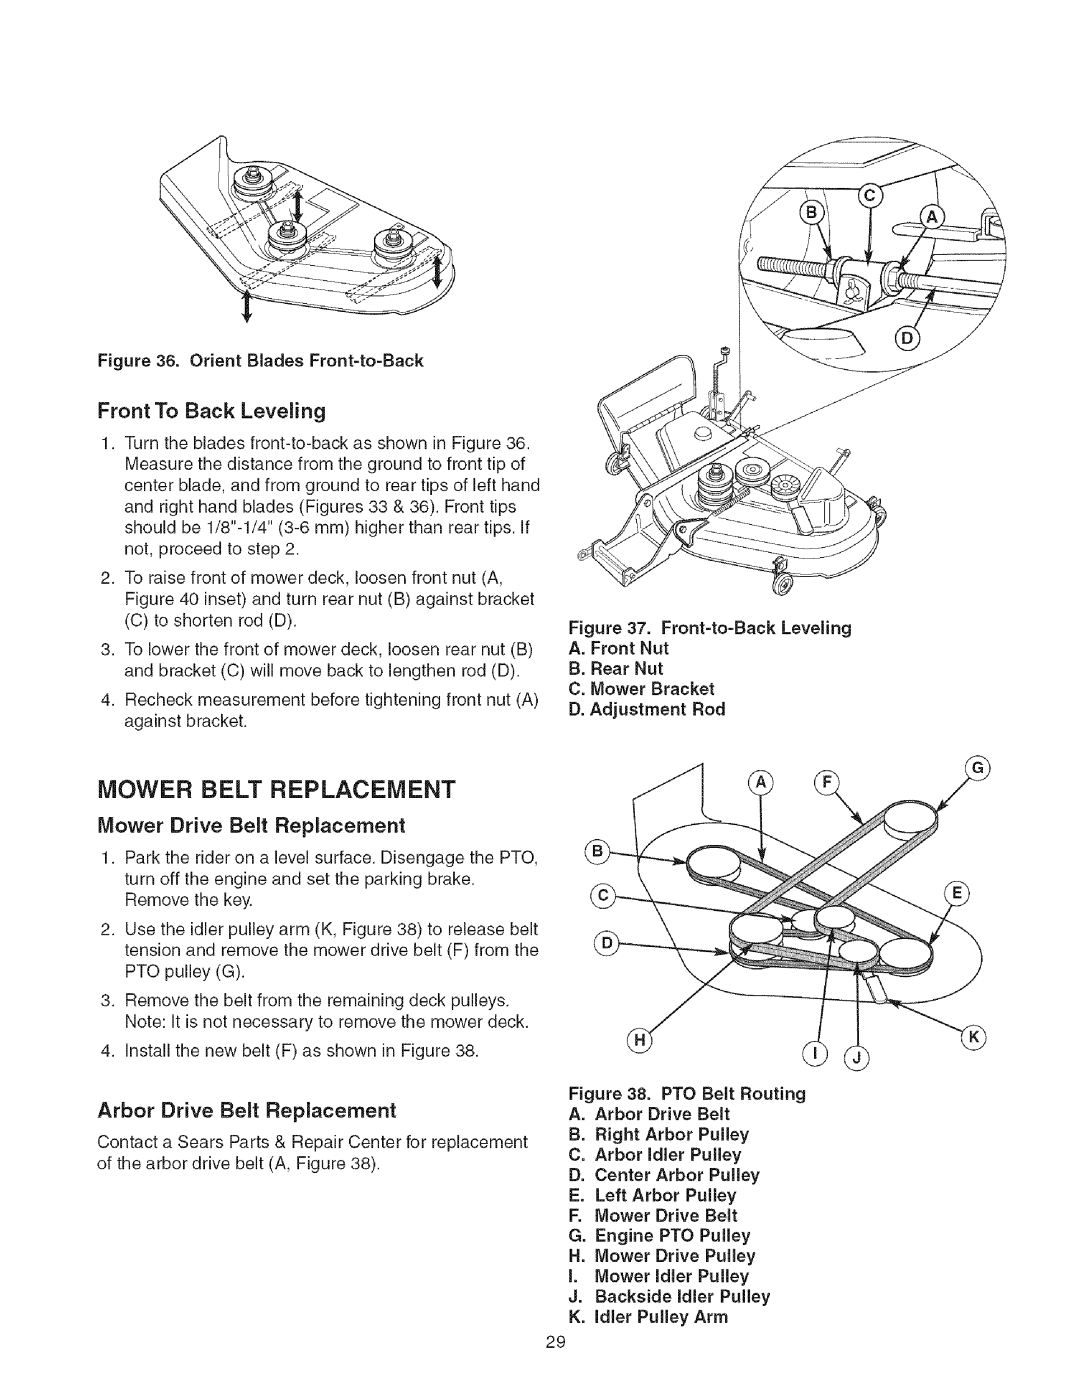 Craftsman 107.2777 manual Mower Belt Replacement, Front To Back Leveling, Orient Blades Front-to-Back, F. Mower Drive Belt 